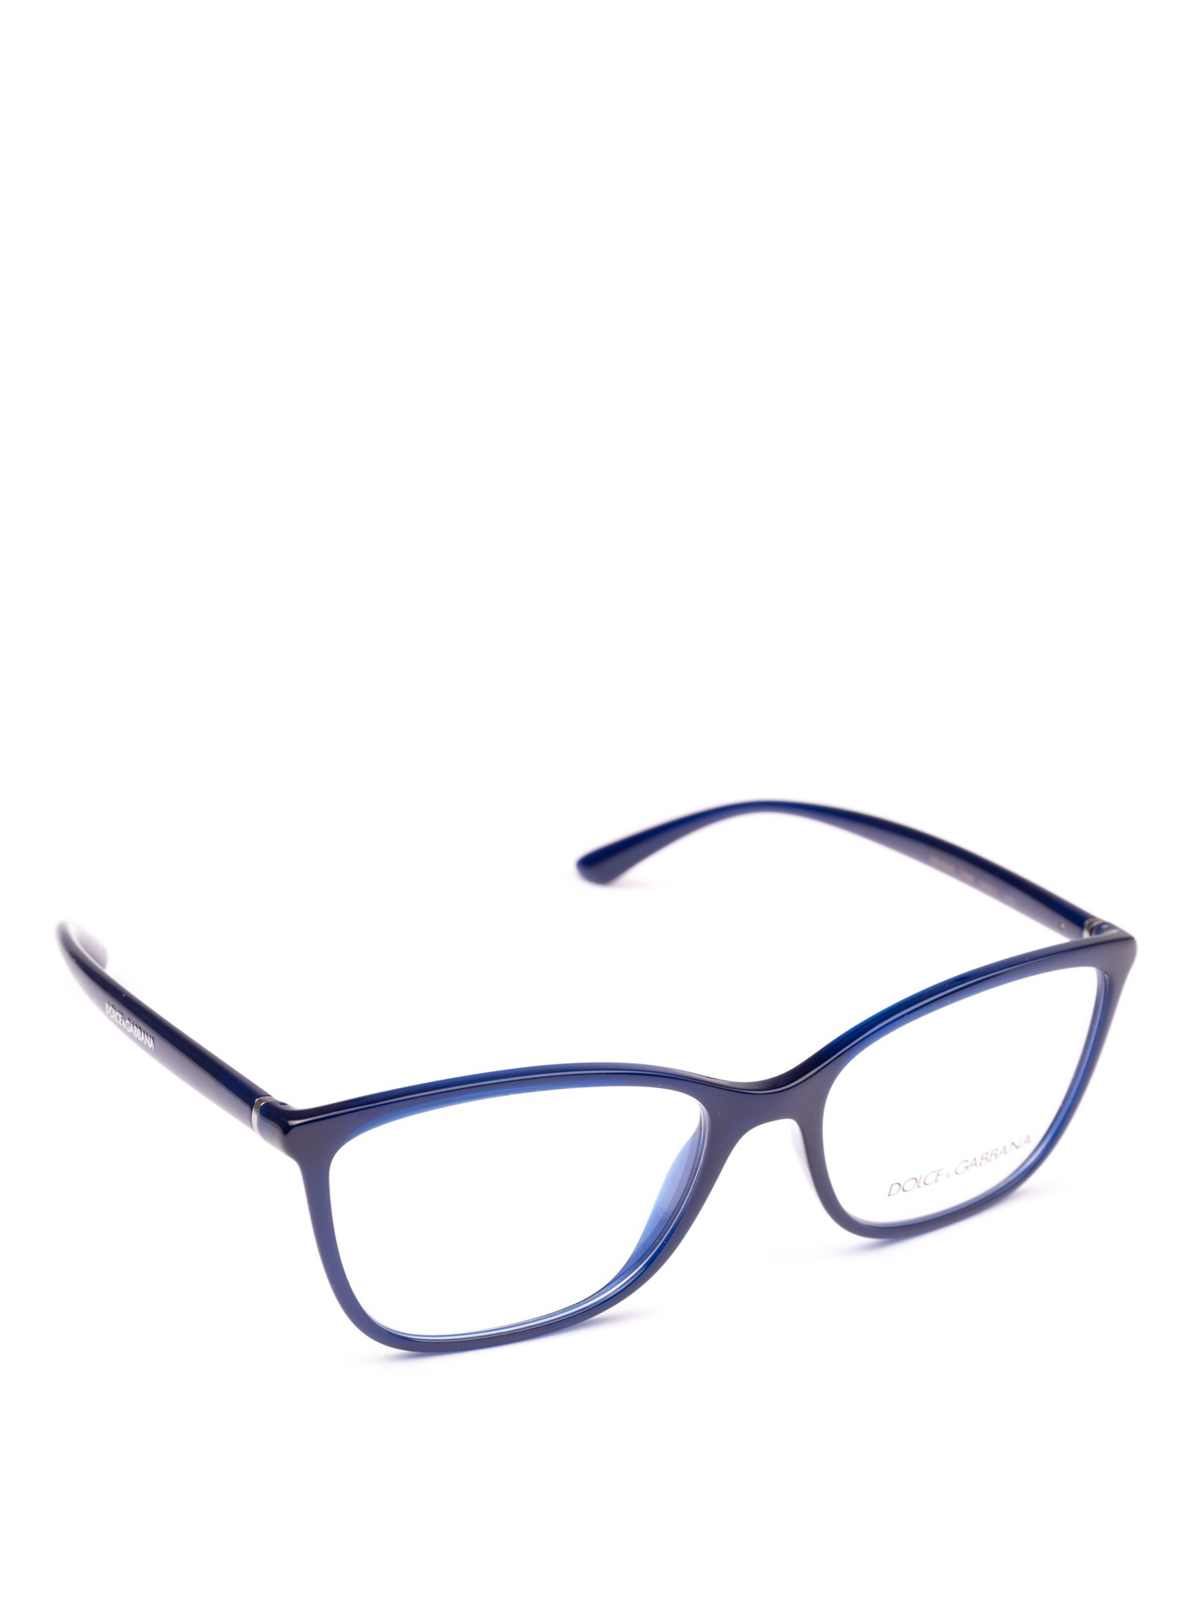 dolce and gabbana blue glasses